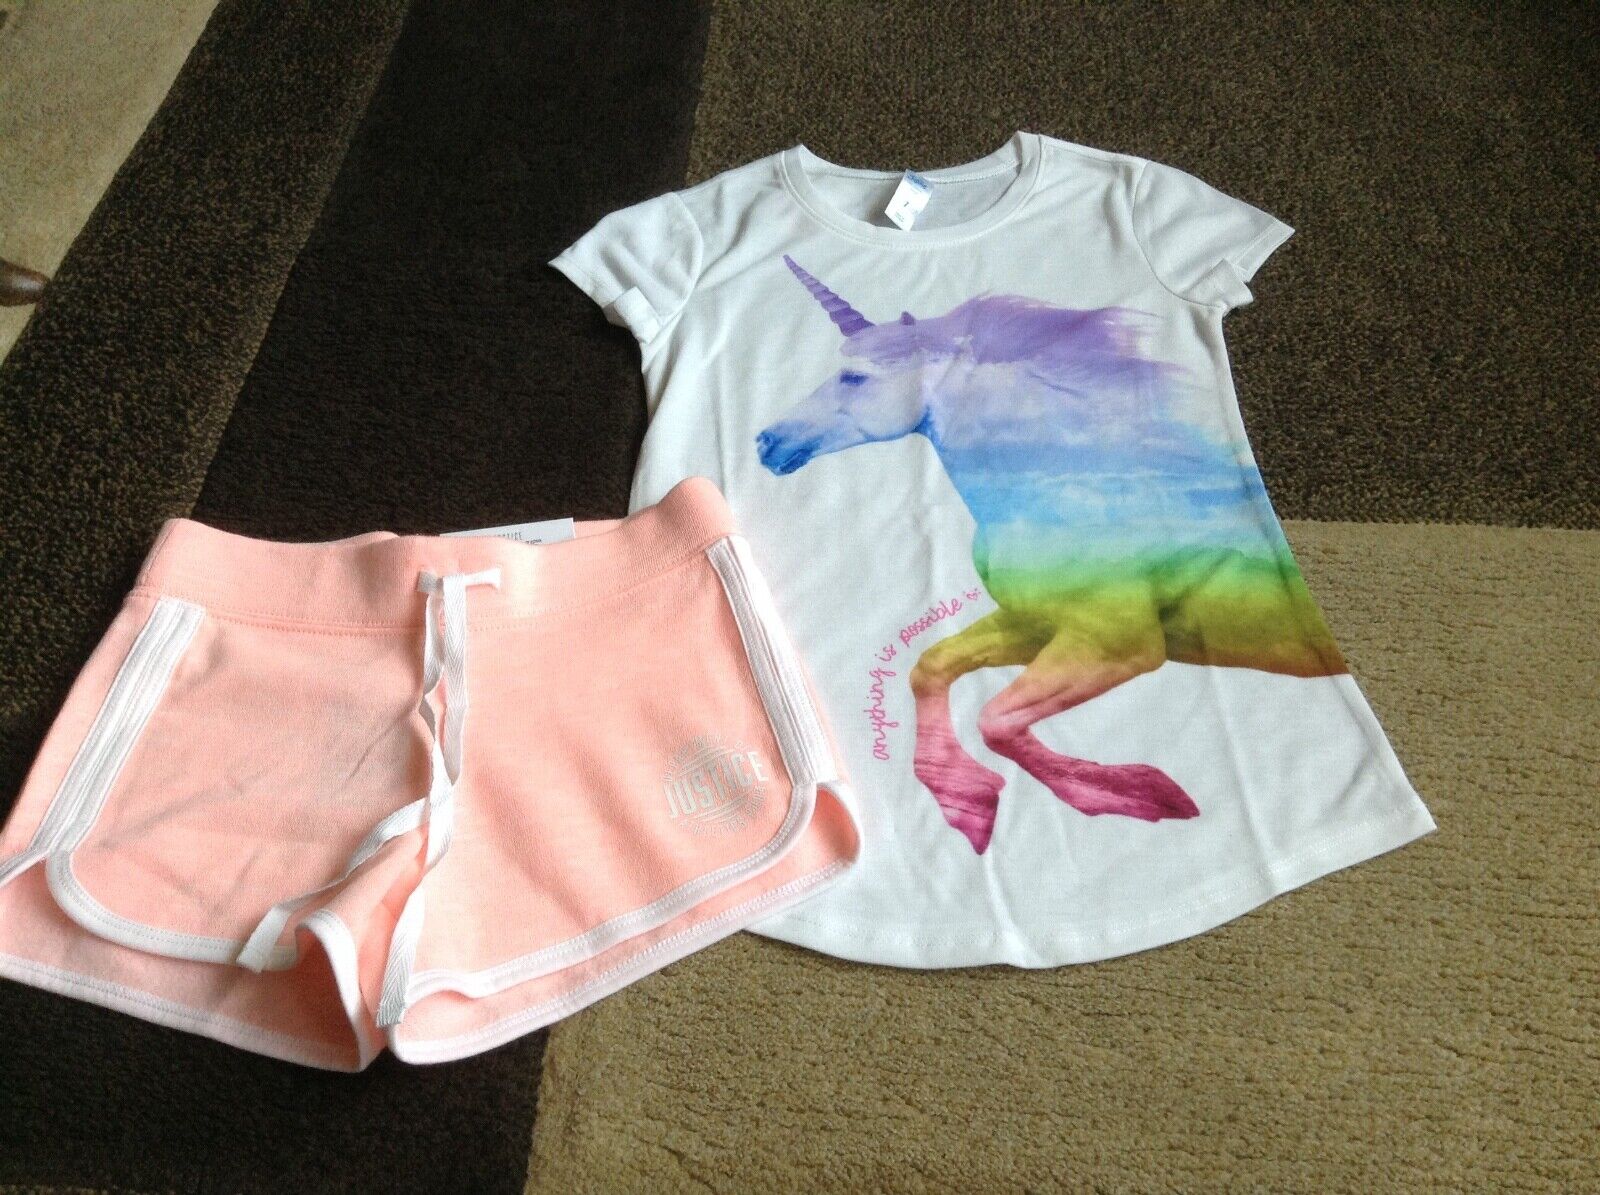 Girls Justice White Short Sleeve Tee Peach Dolphin Shorts Size6/7 (nwot/nwt)